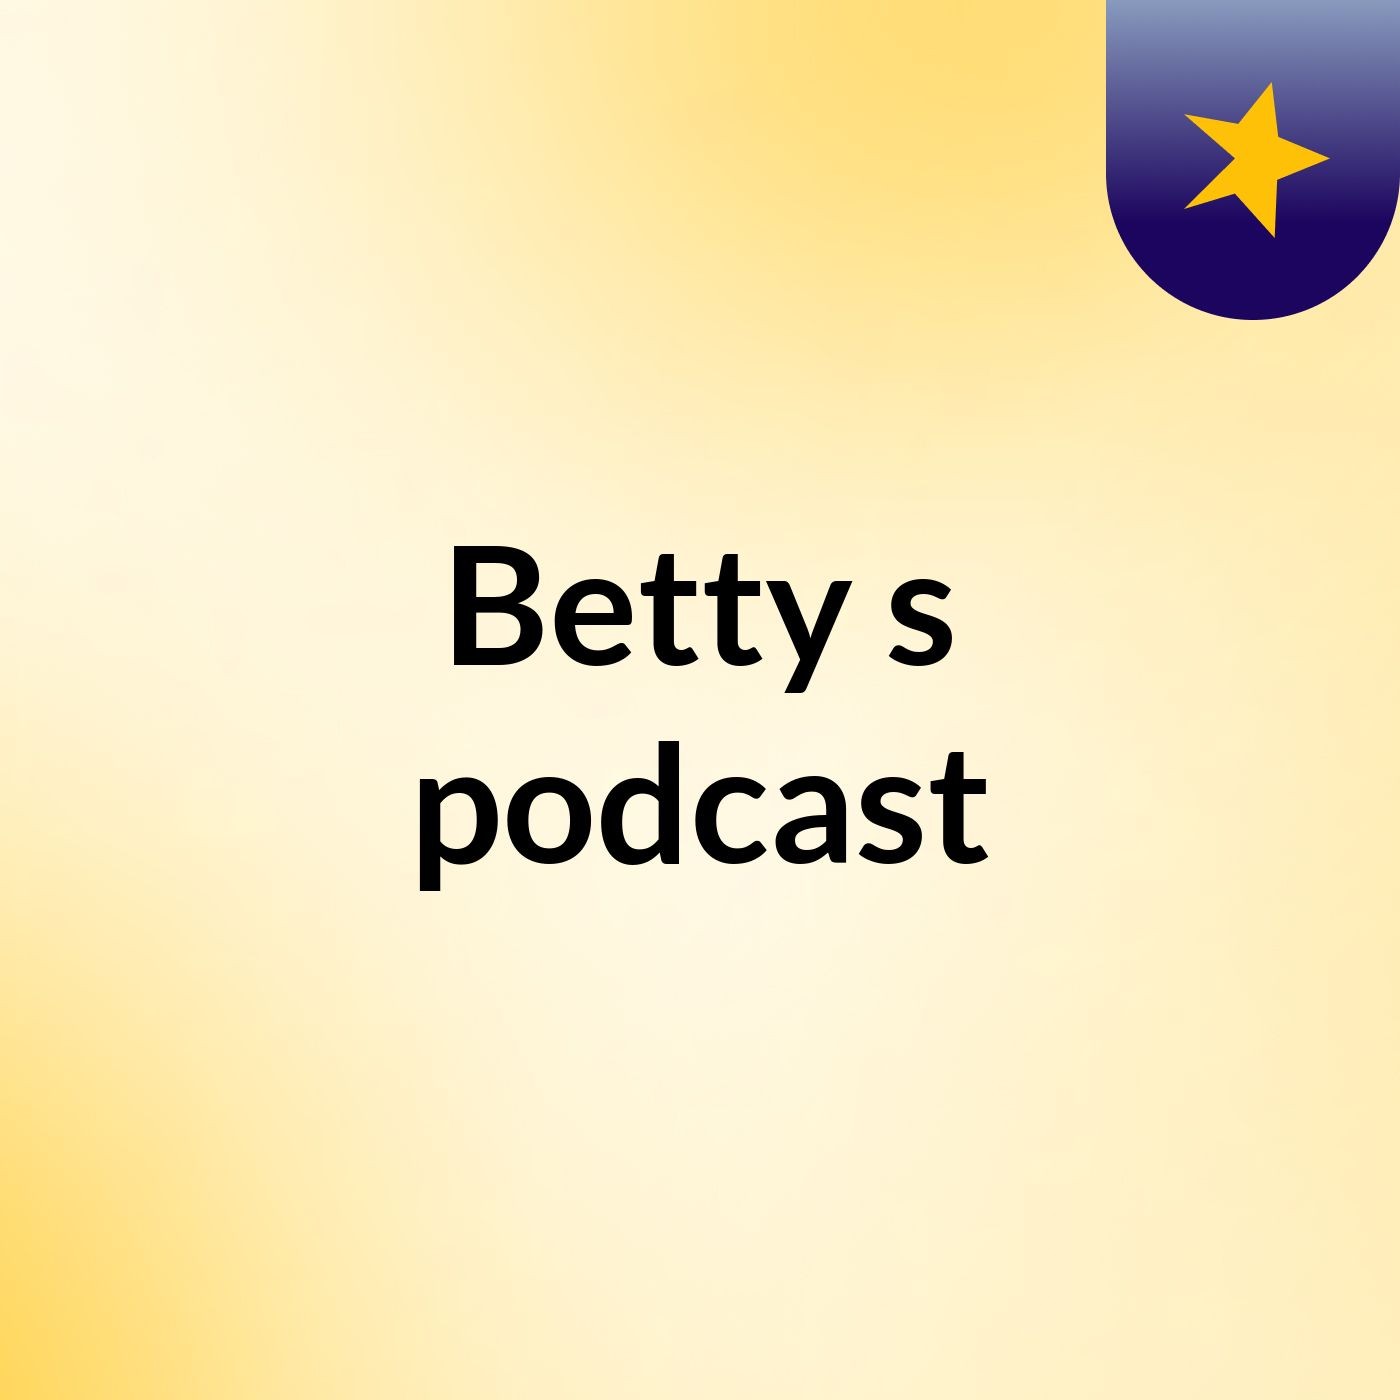 Episode 2 - Betty's podcast